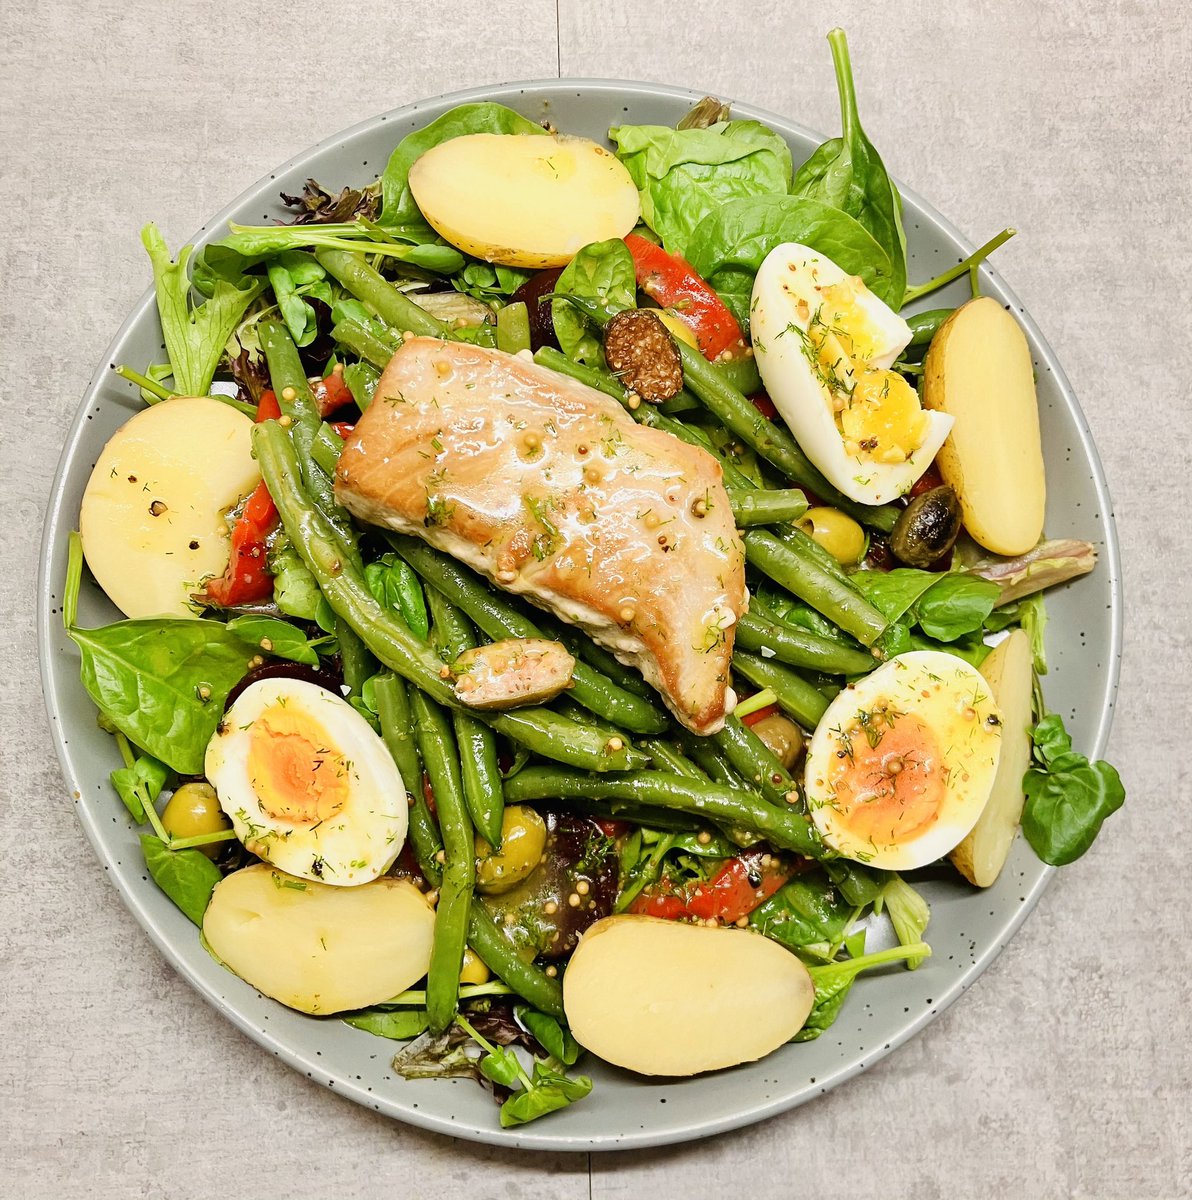 My version of salad Nicoise #dinner #food #workout #healthy #eatting